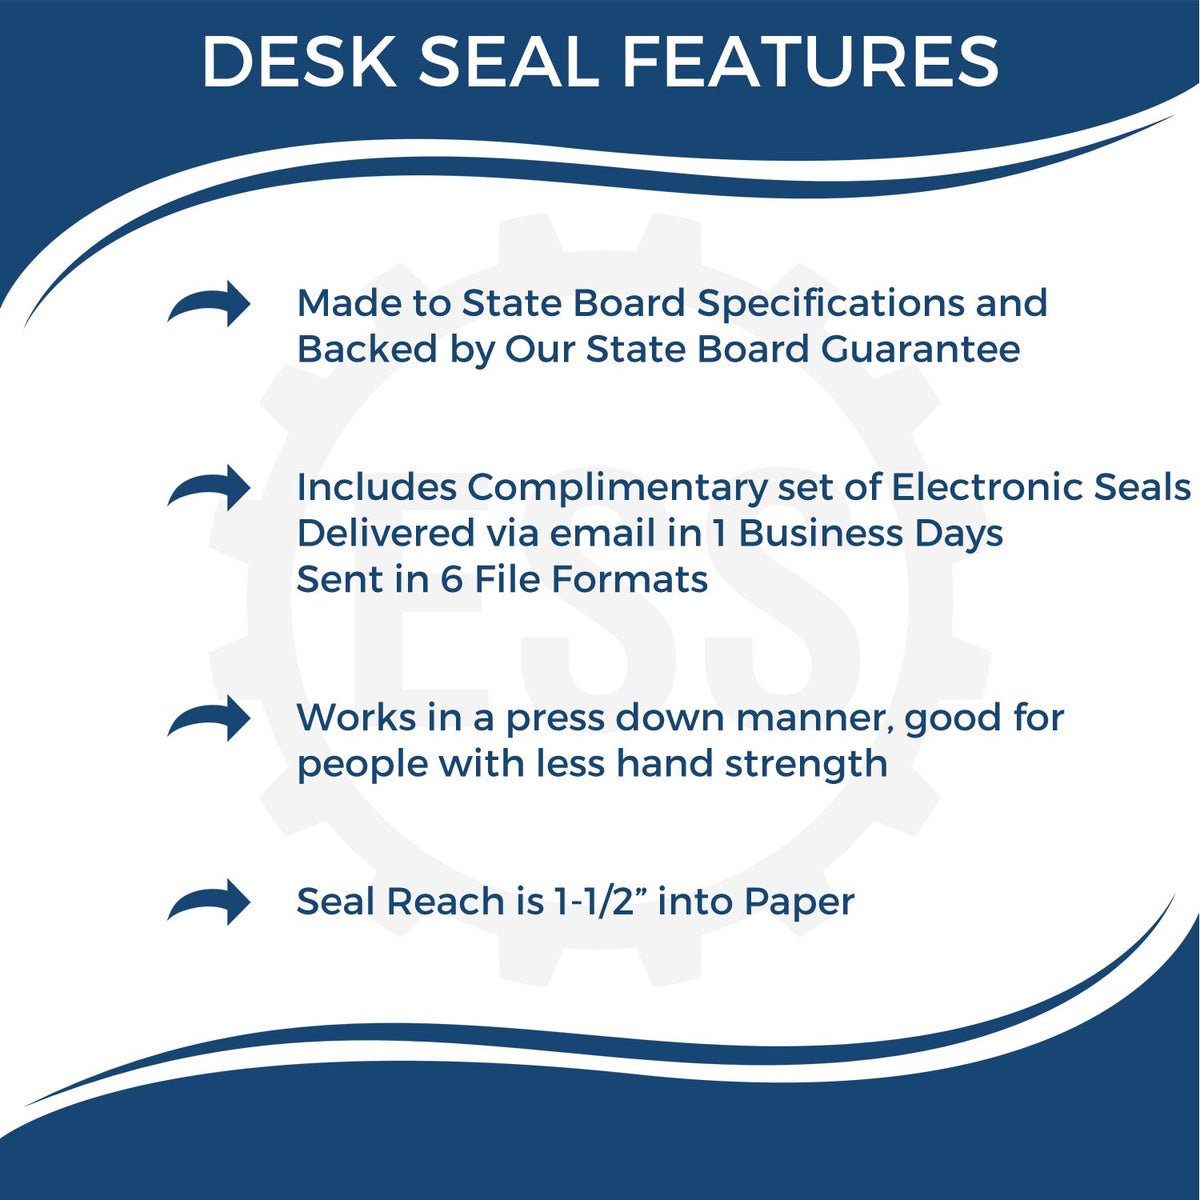 A picture of an infographic highlighting the selling points for the Utah Geologist Desk Seal